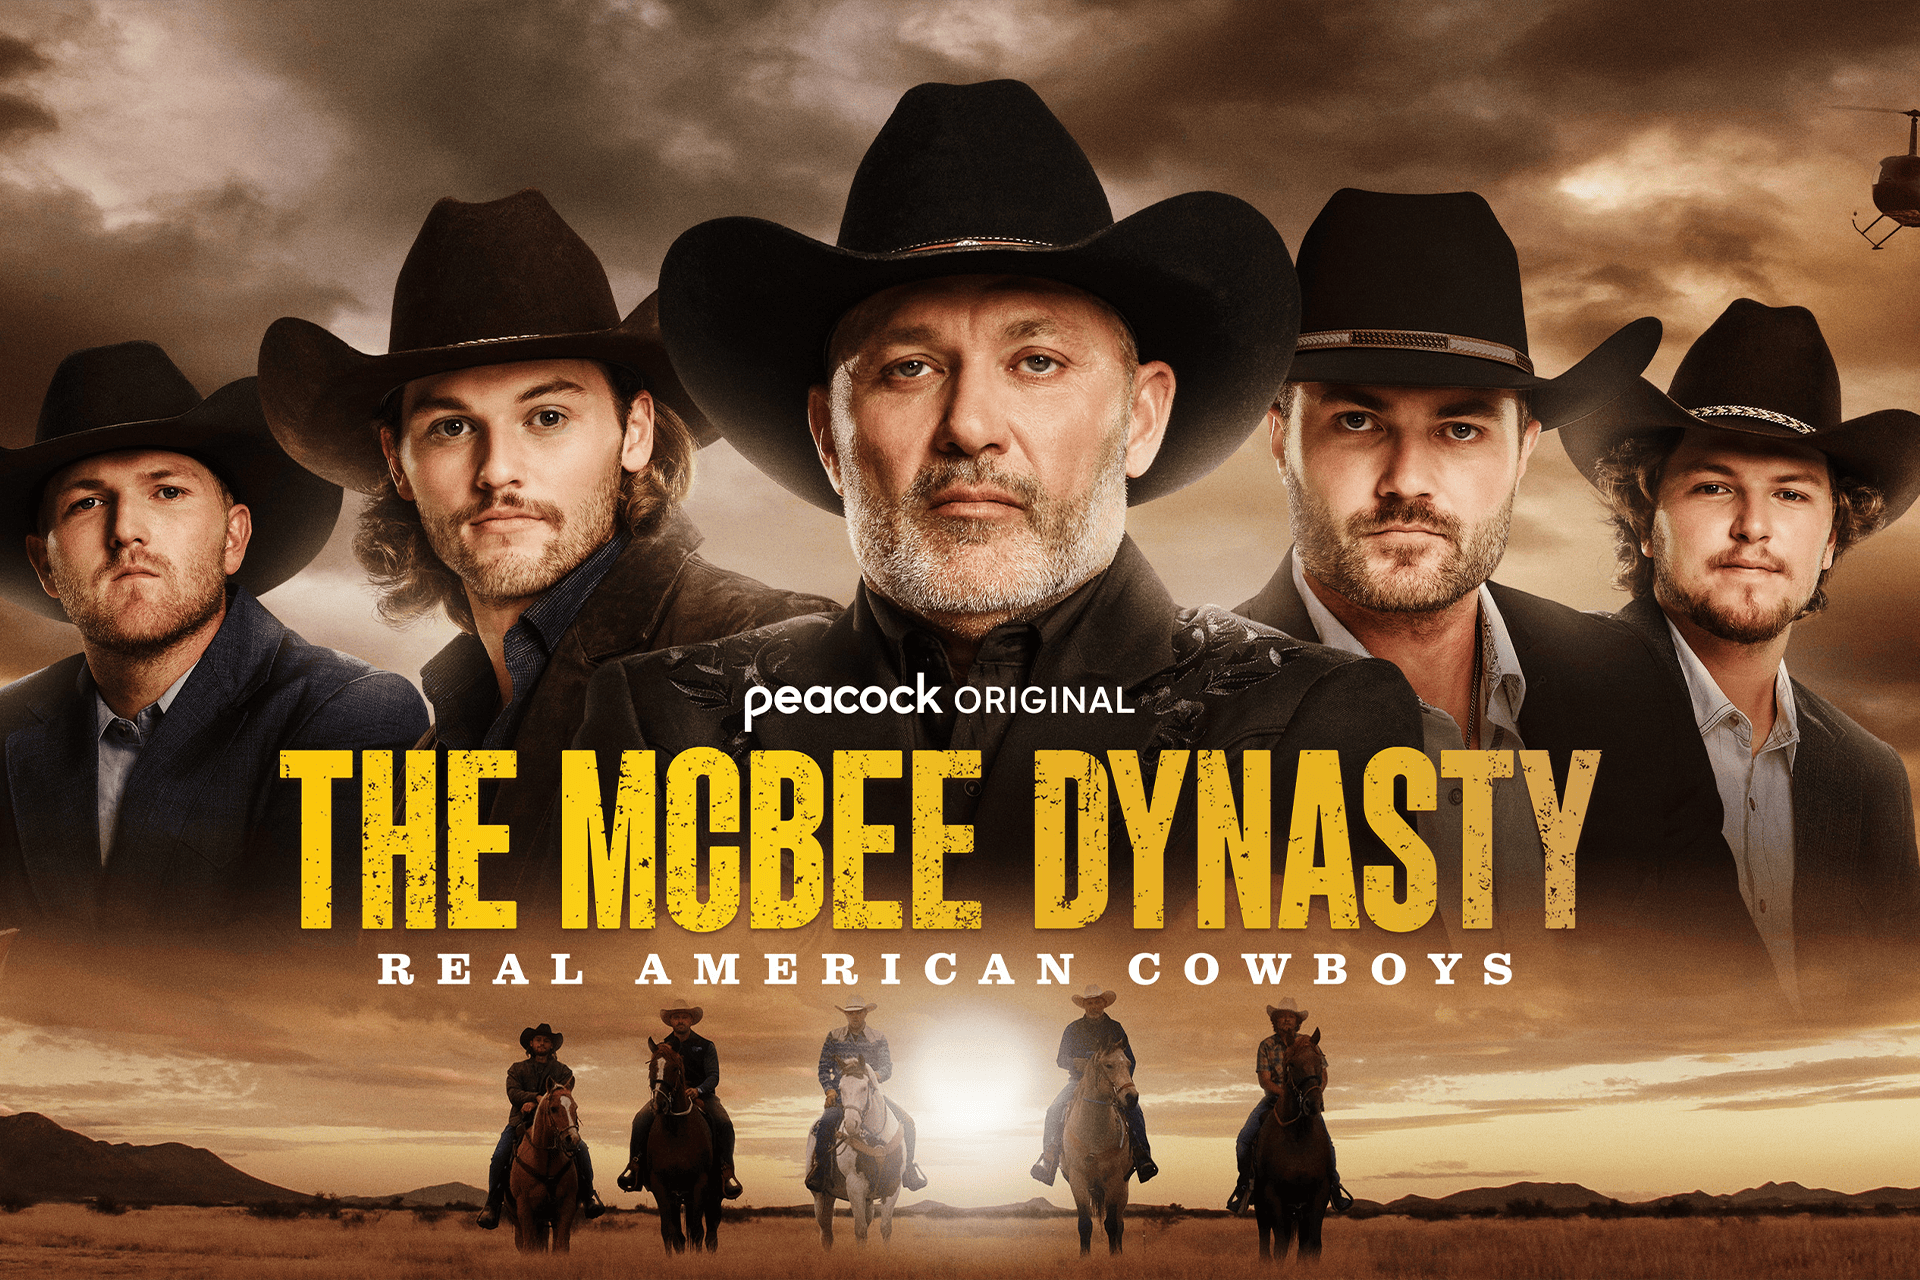 The McBee Dynasty: The Real American Cowboys